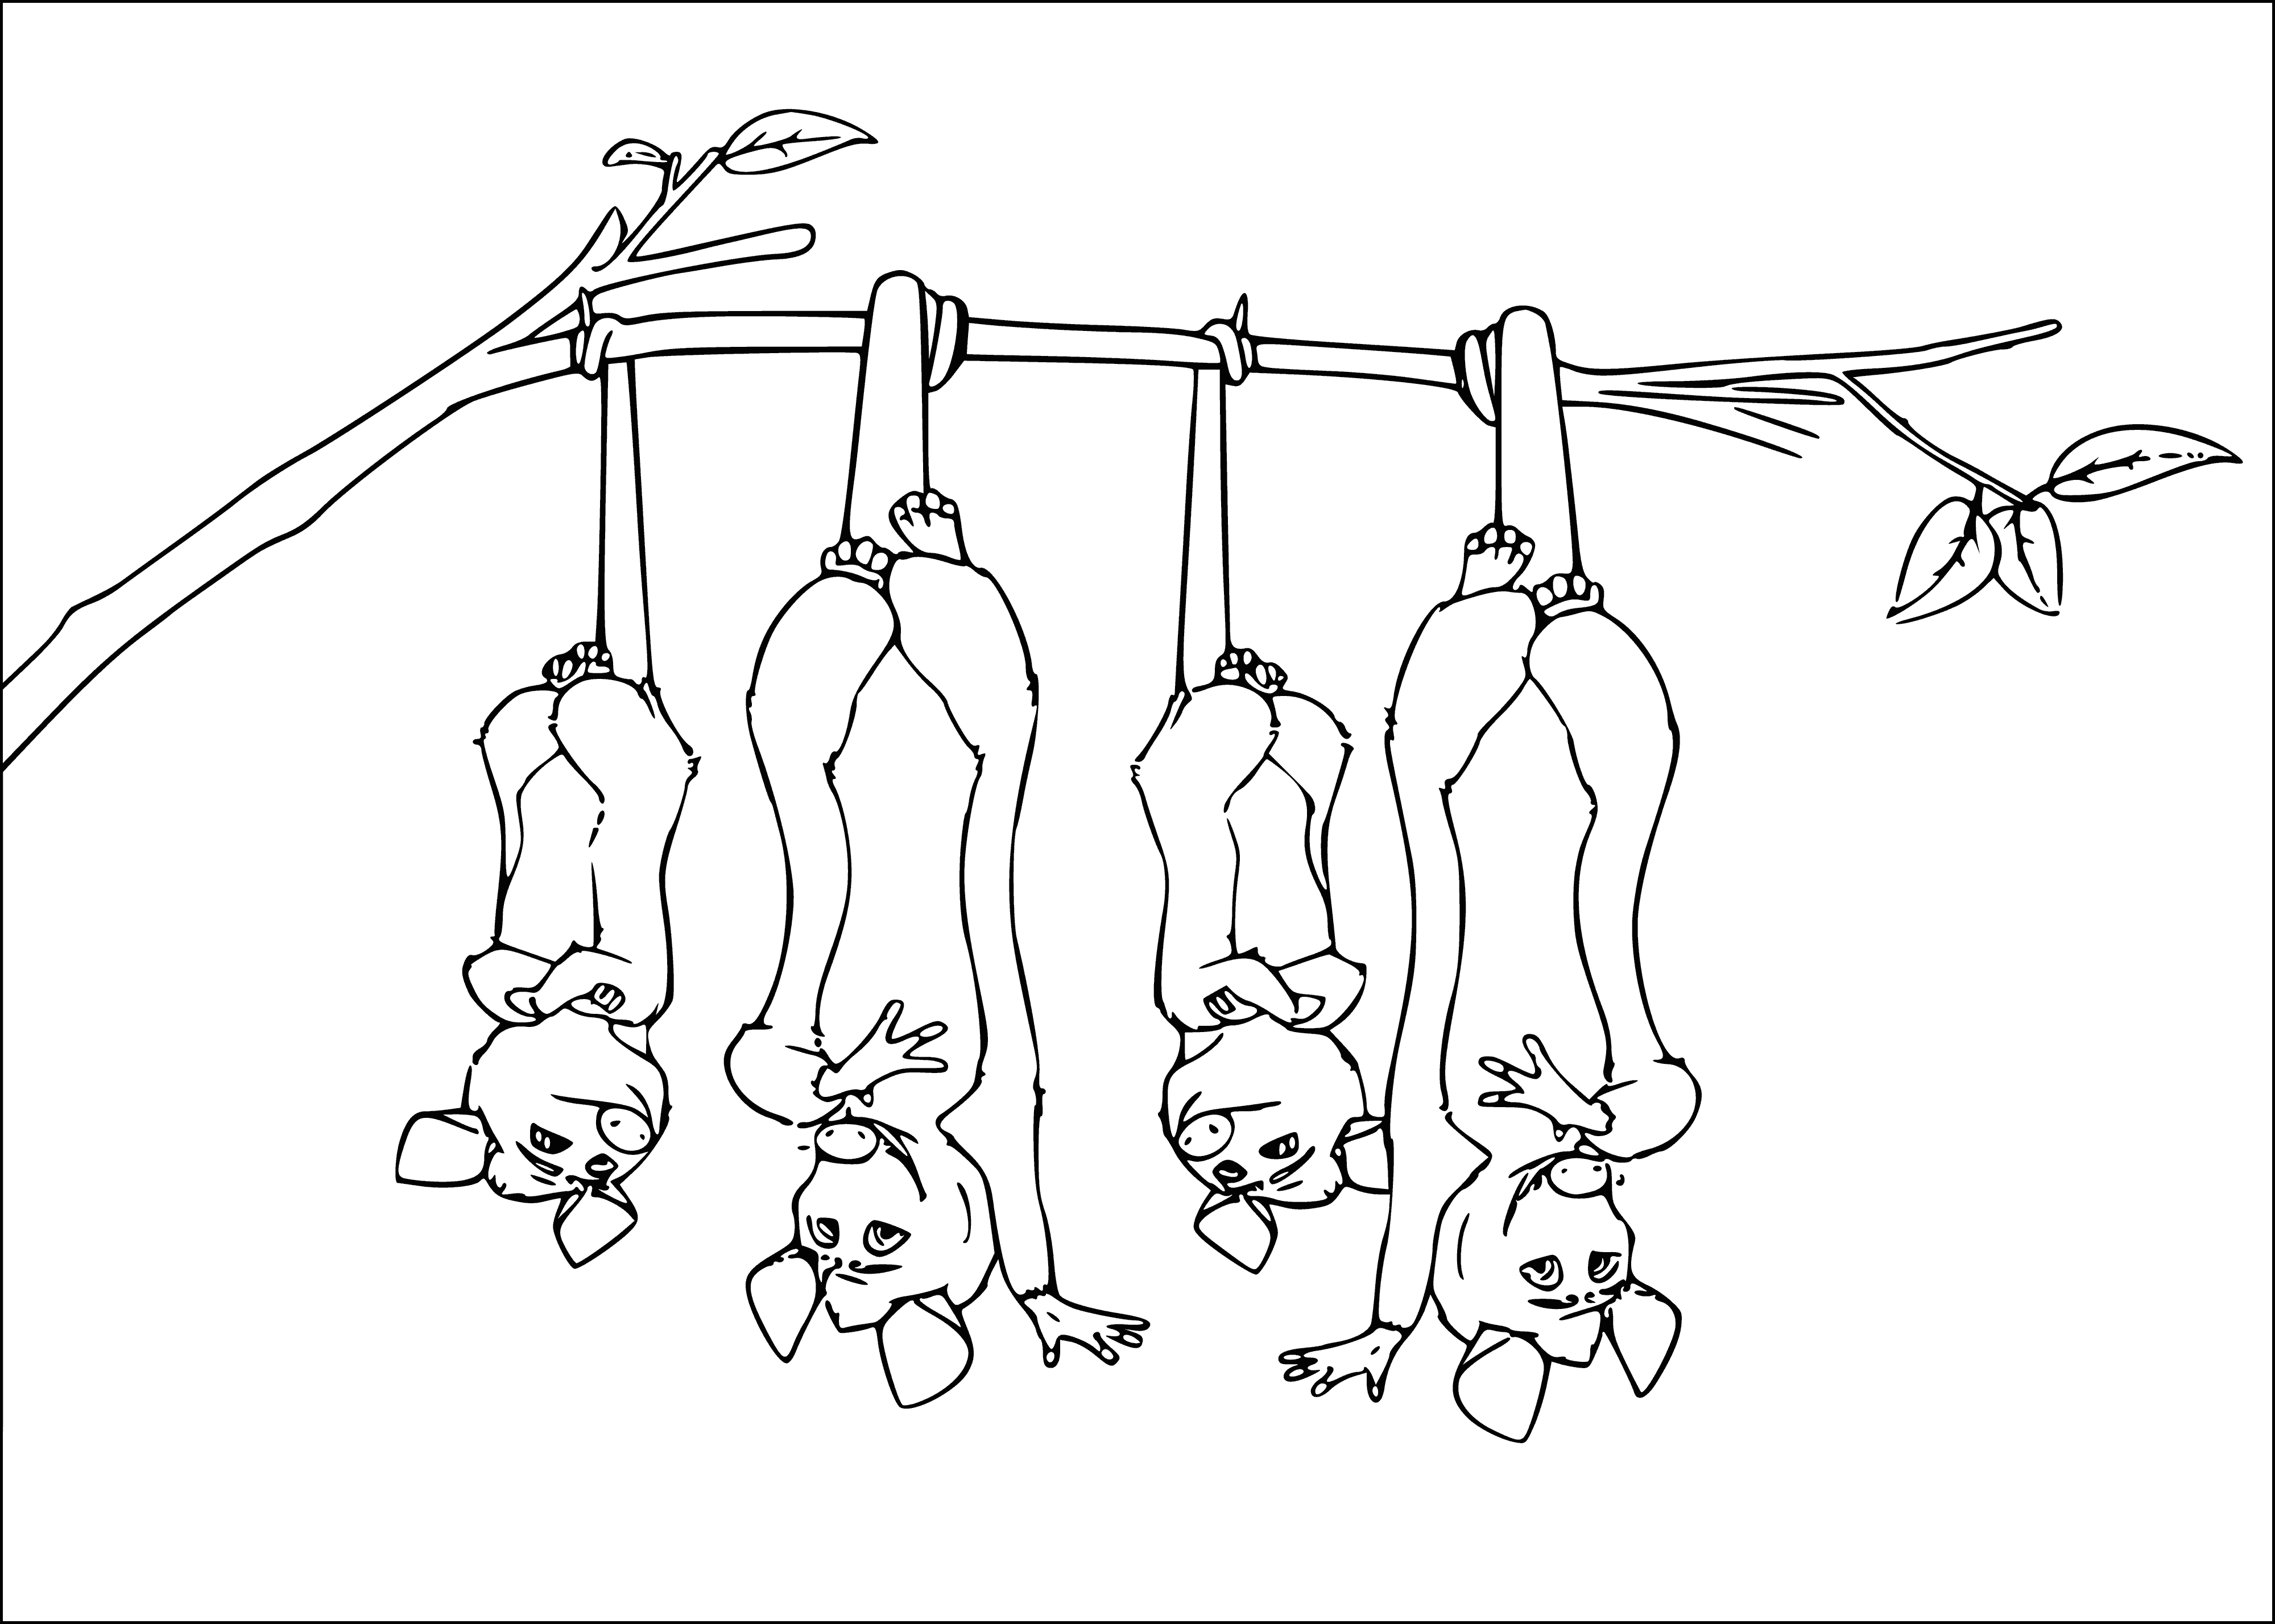 coloring page: Three opossums standing, eating & sitting down in a coloring page.